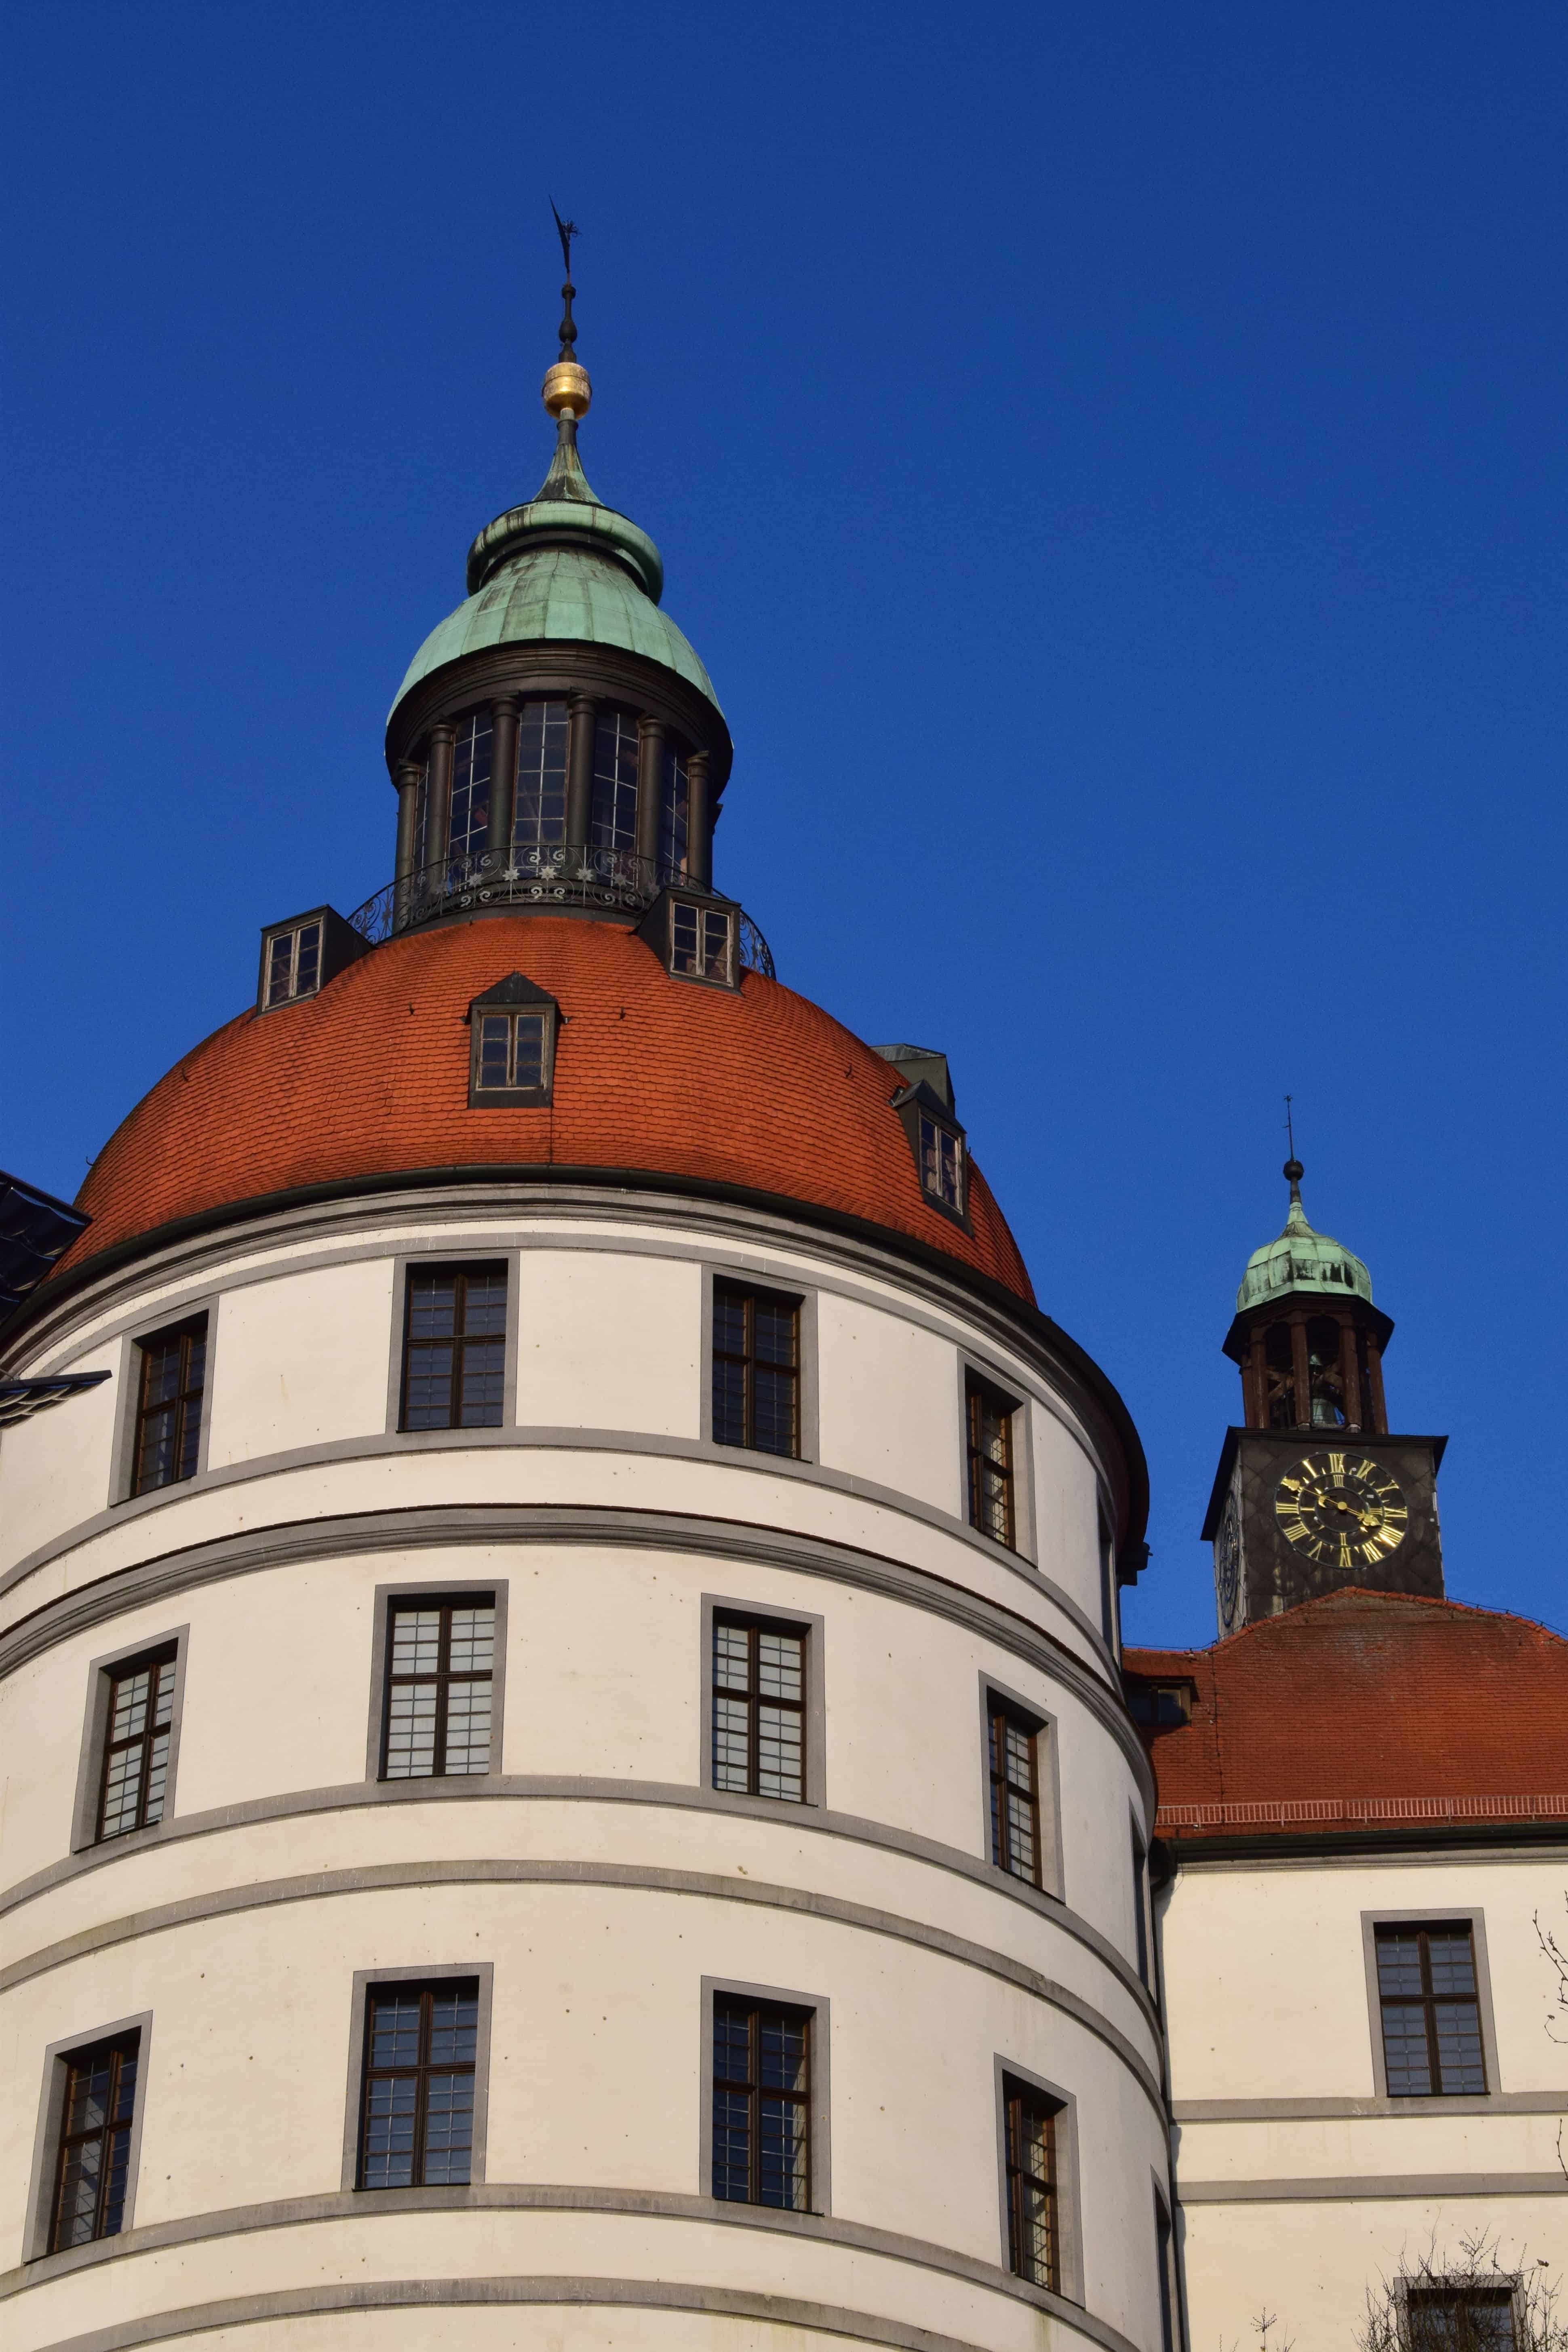 Free picture: dome, architecture, facade, roof, blue sky, urban ...